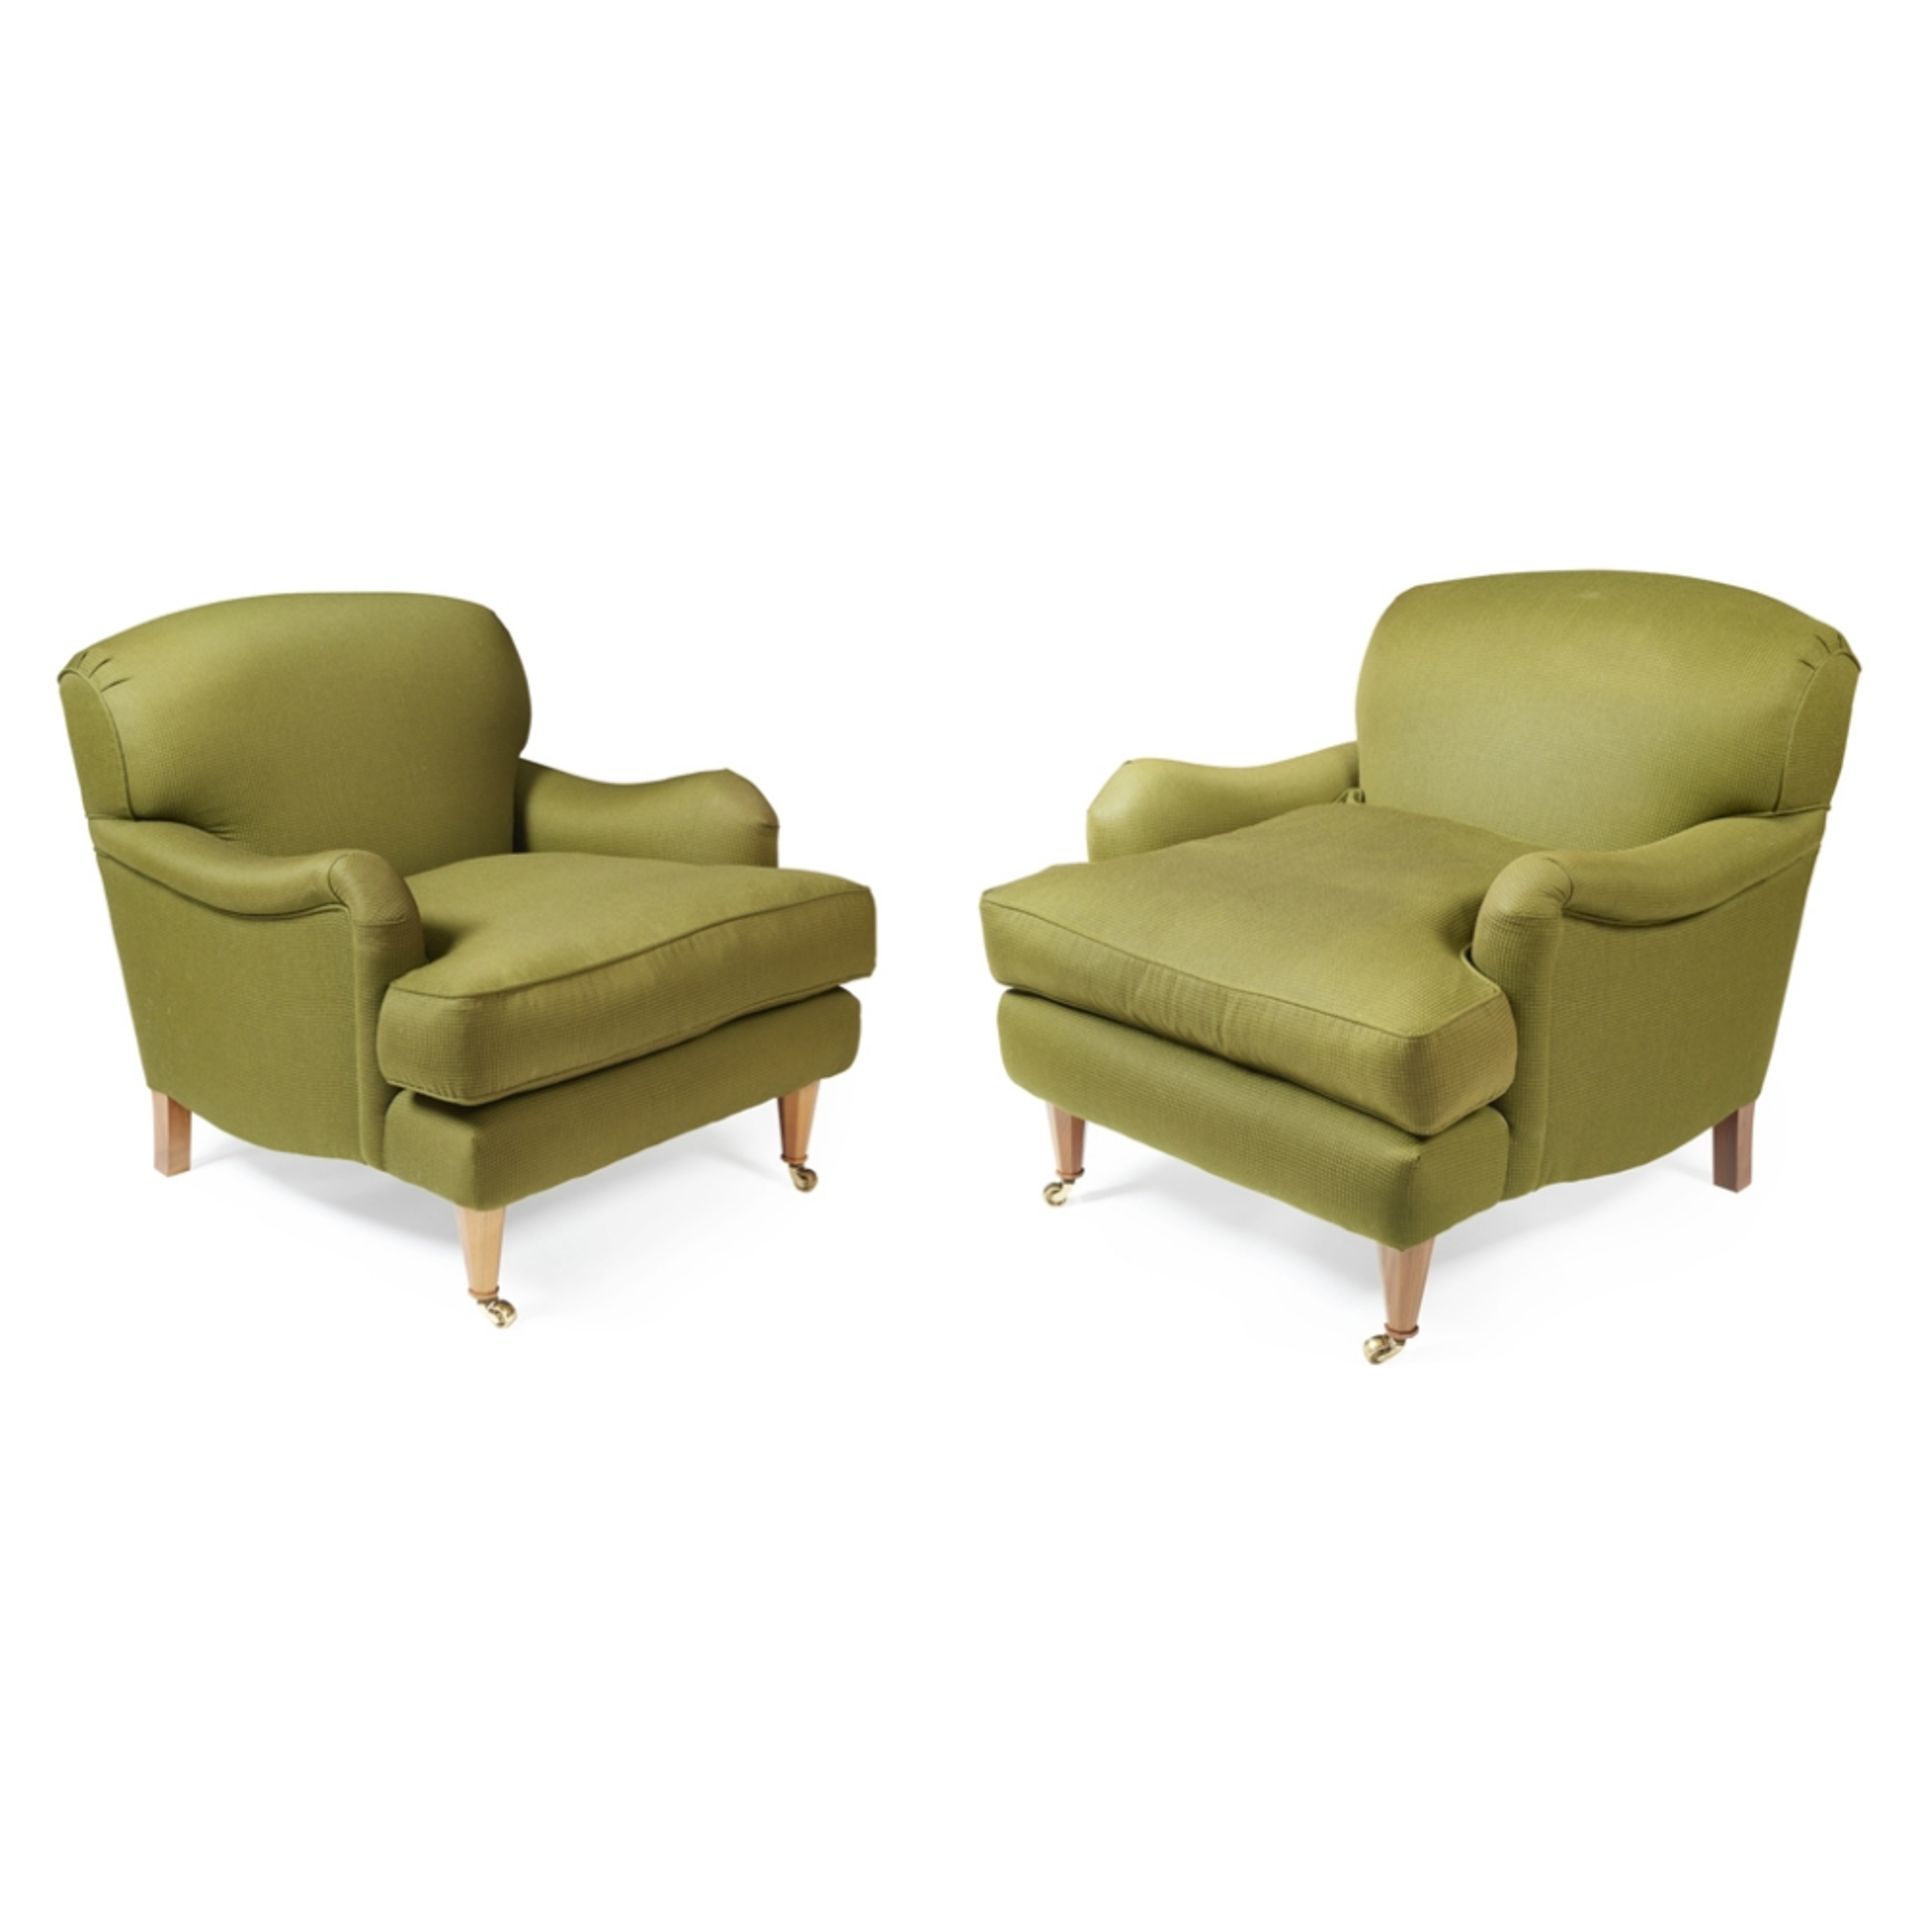 DAVID LINLEY, LONDON PAIR OF UPHOLSTERED EASY ARMCHAIRS, 20TH CENTURY the low backs and scroll